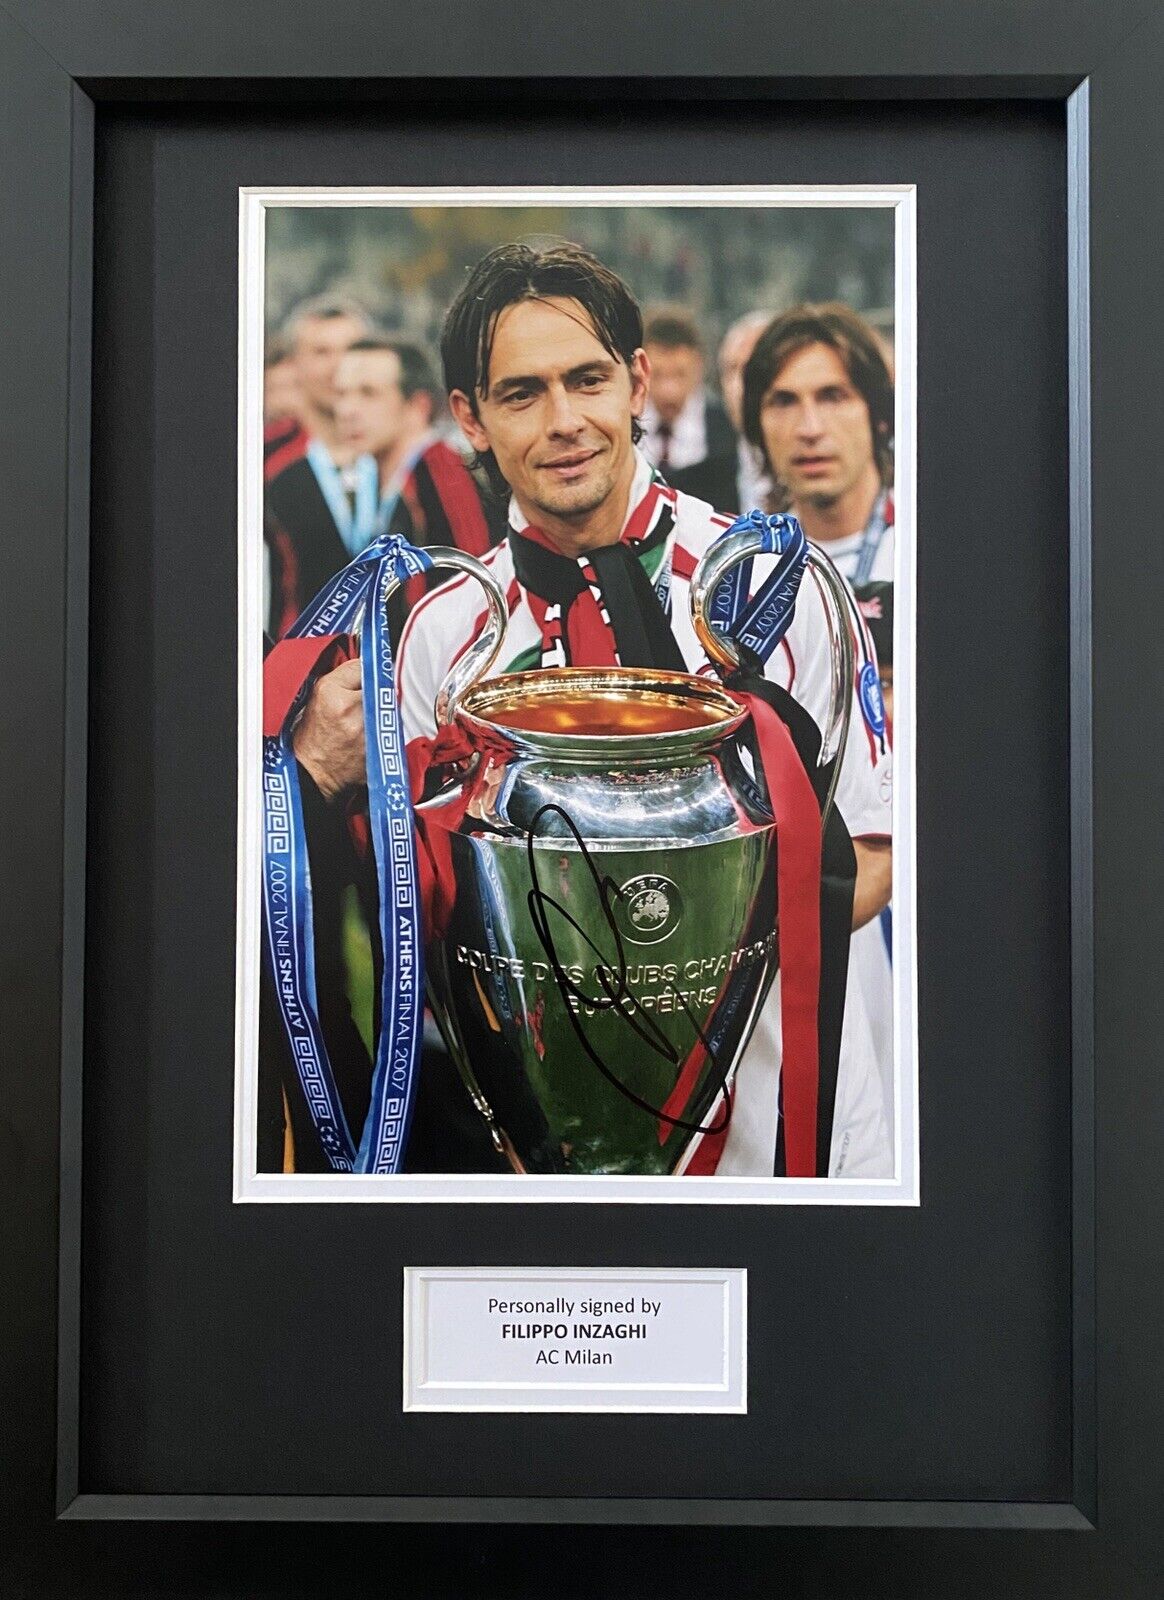 Filippo Inzaghi Hand Signed AC Milan Photo Poster painting In 16x12 Frame Display, Proof